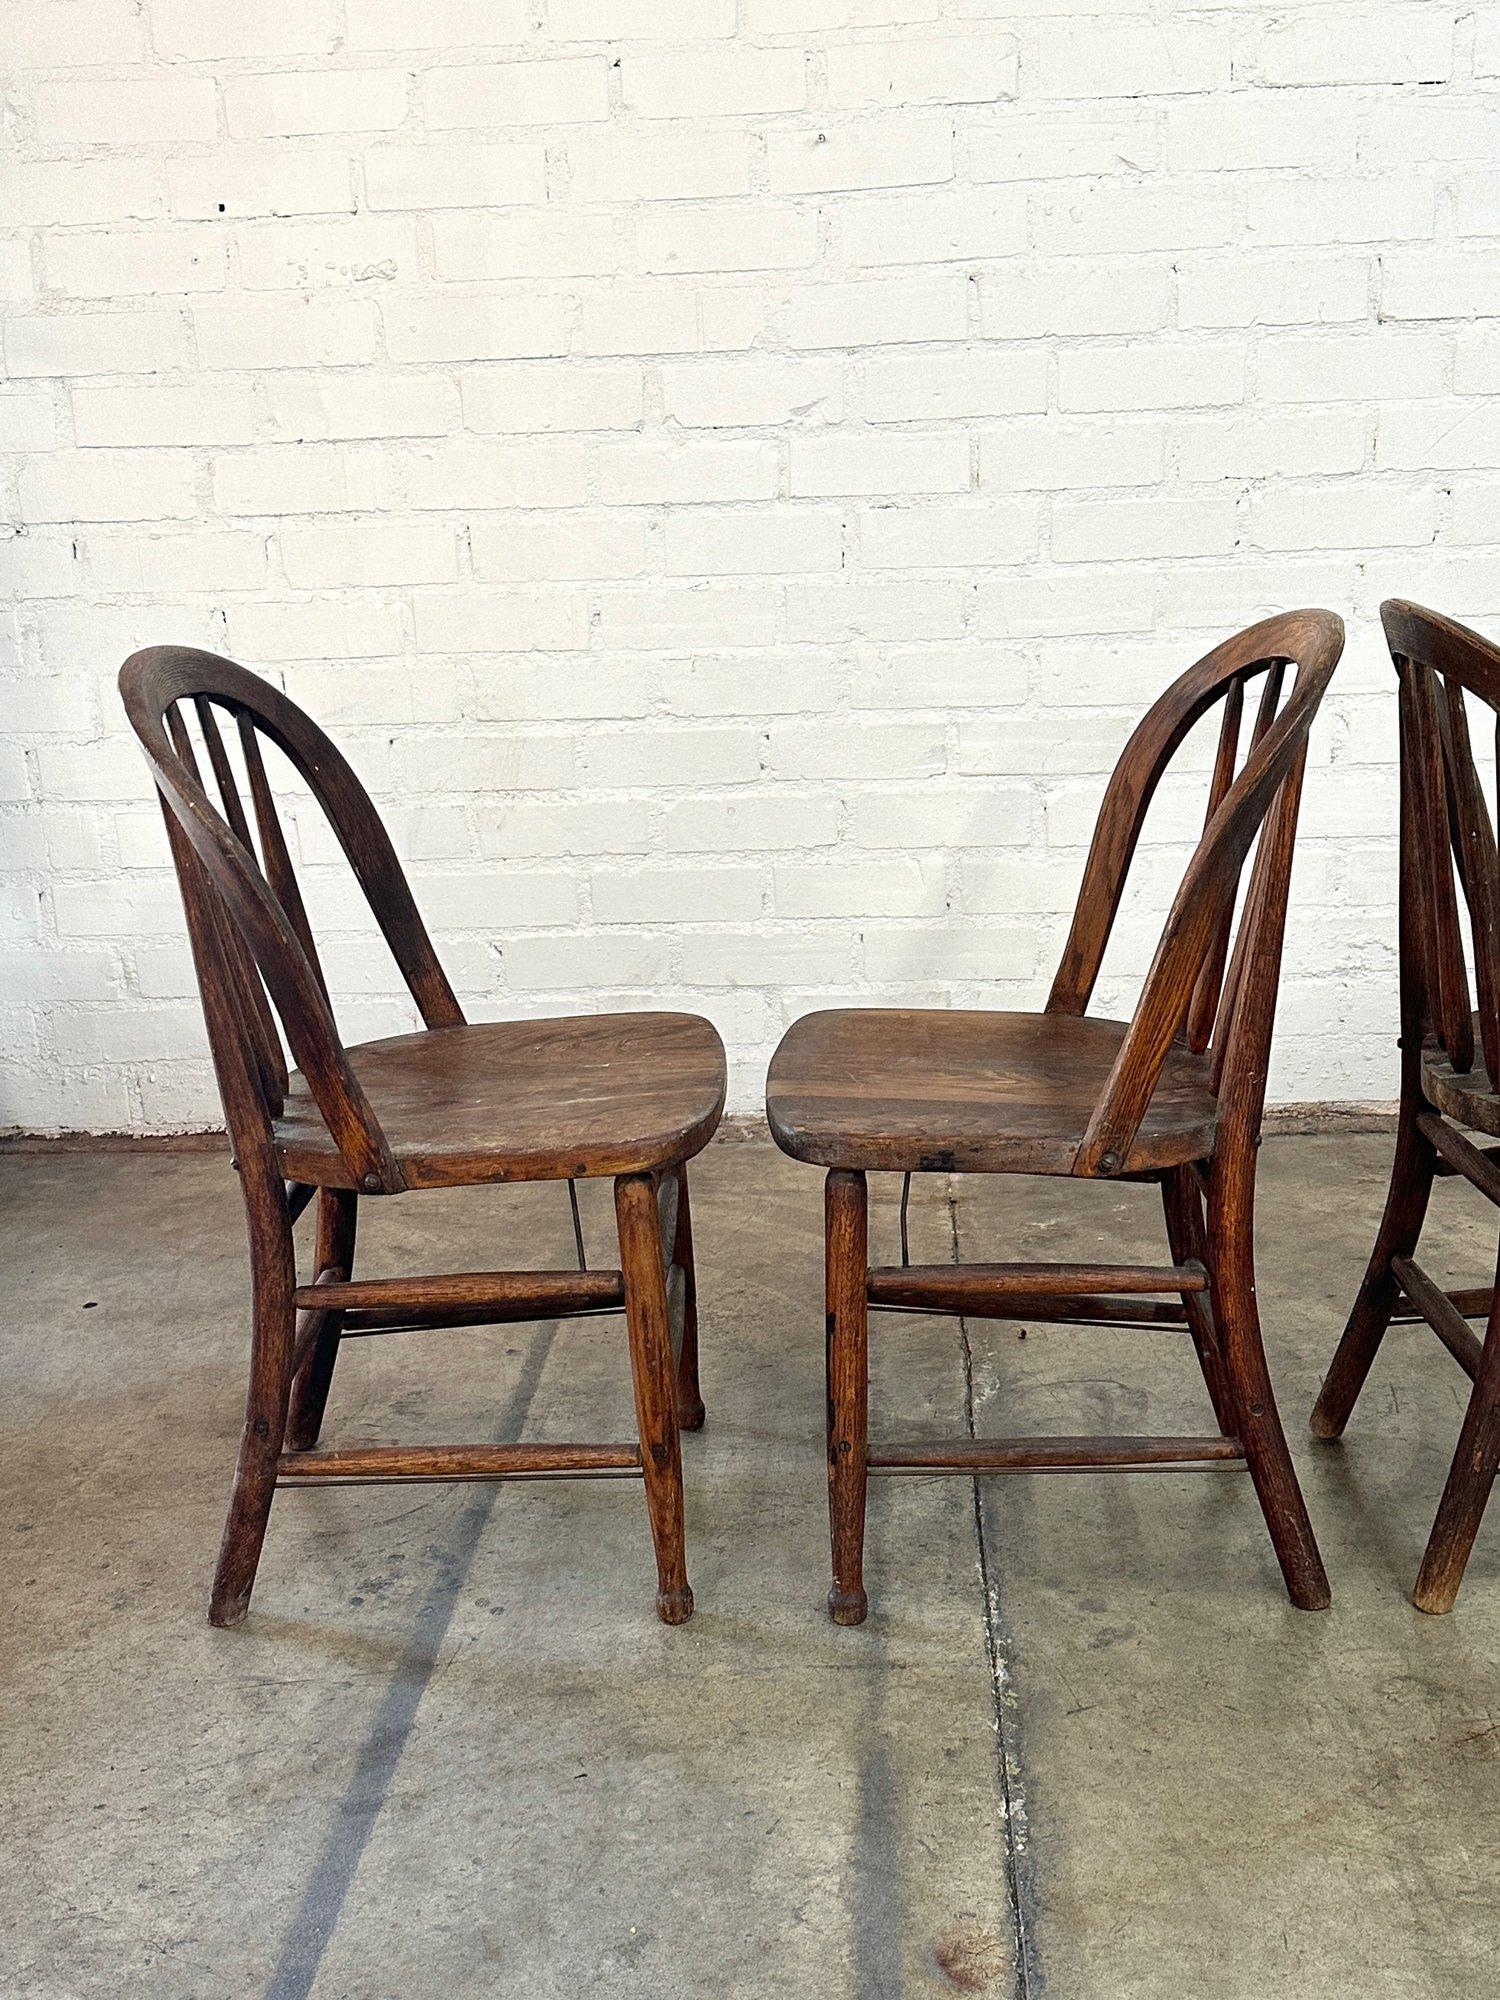 Vintage Farmhouse Spindle Chairs 1